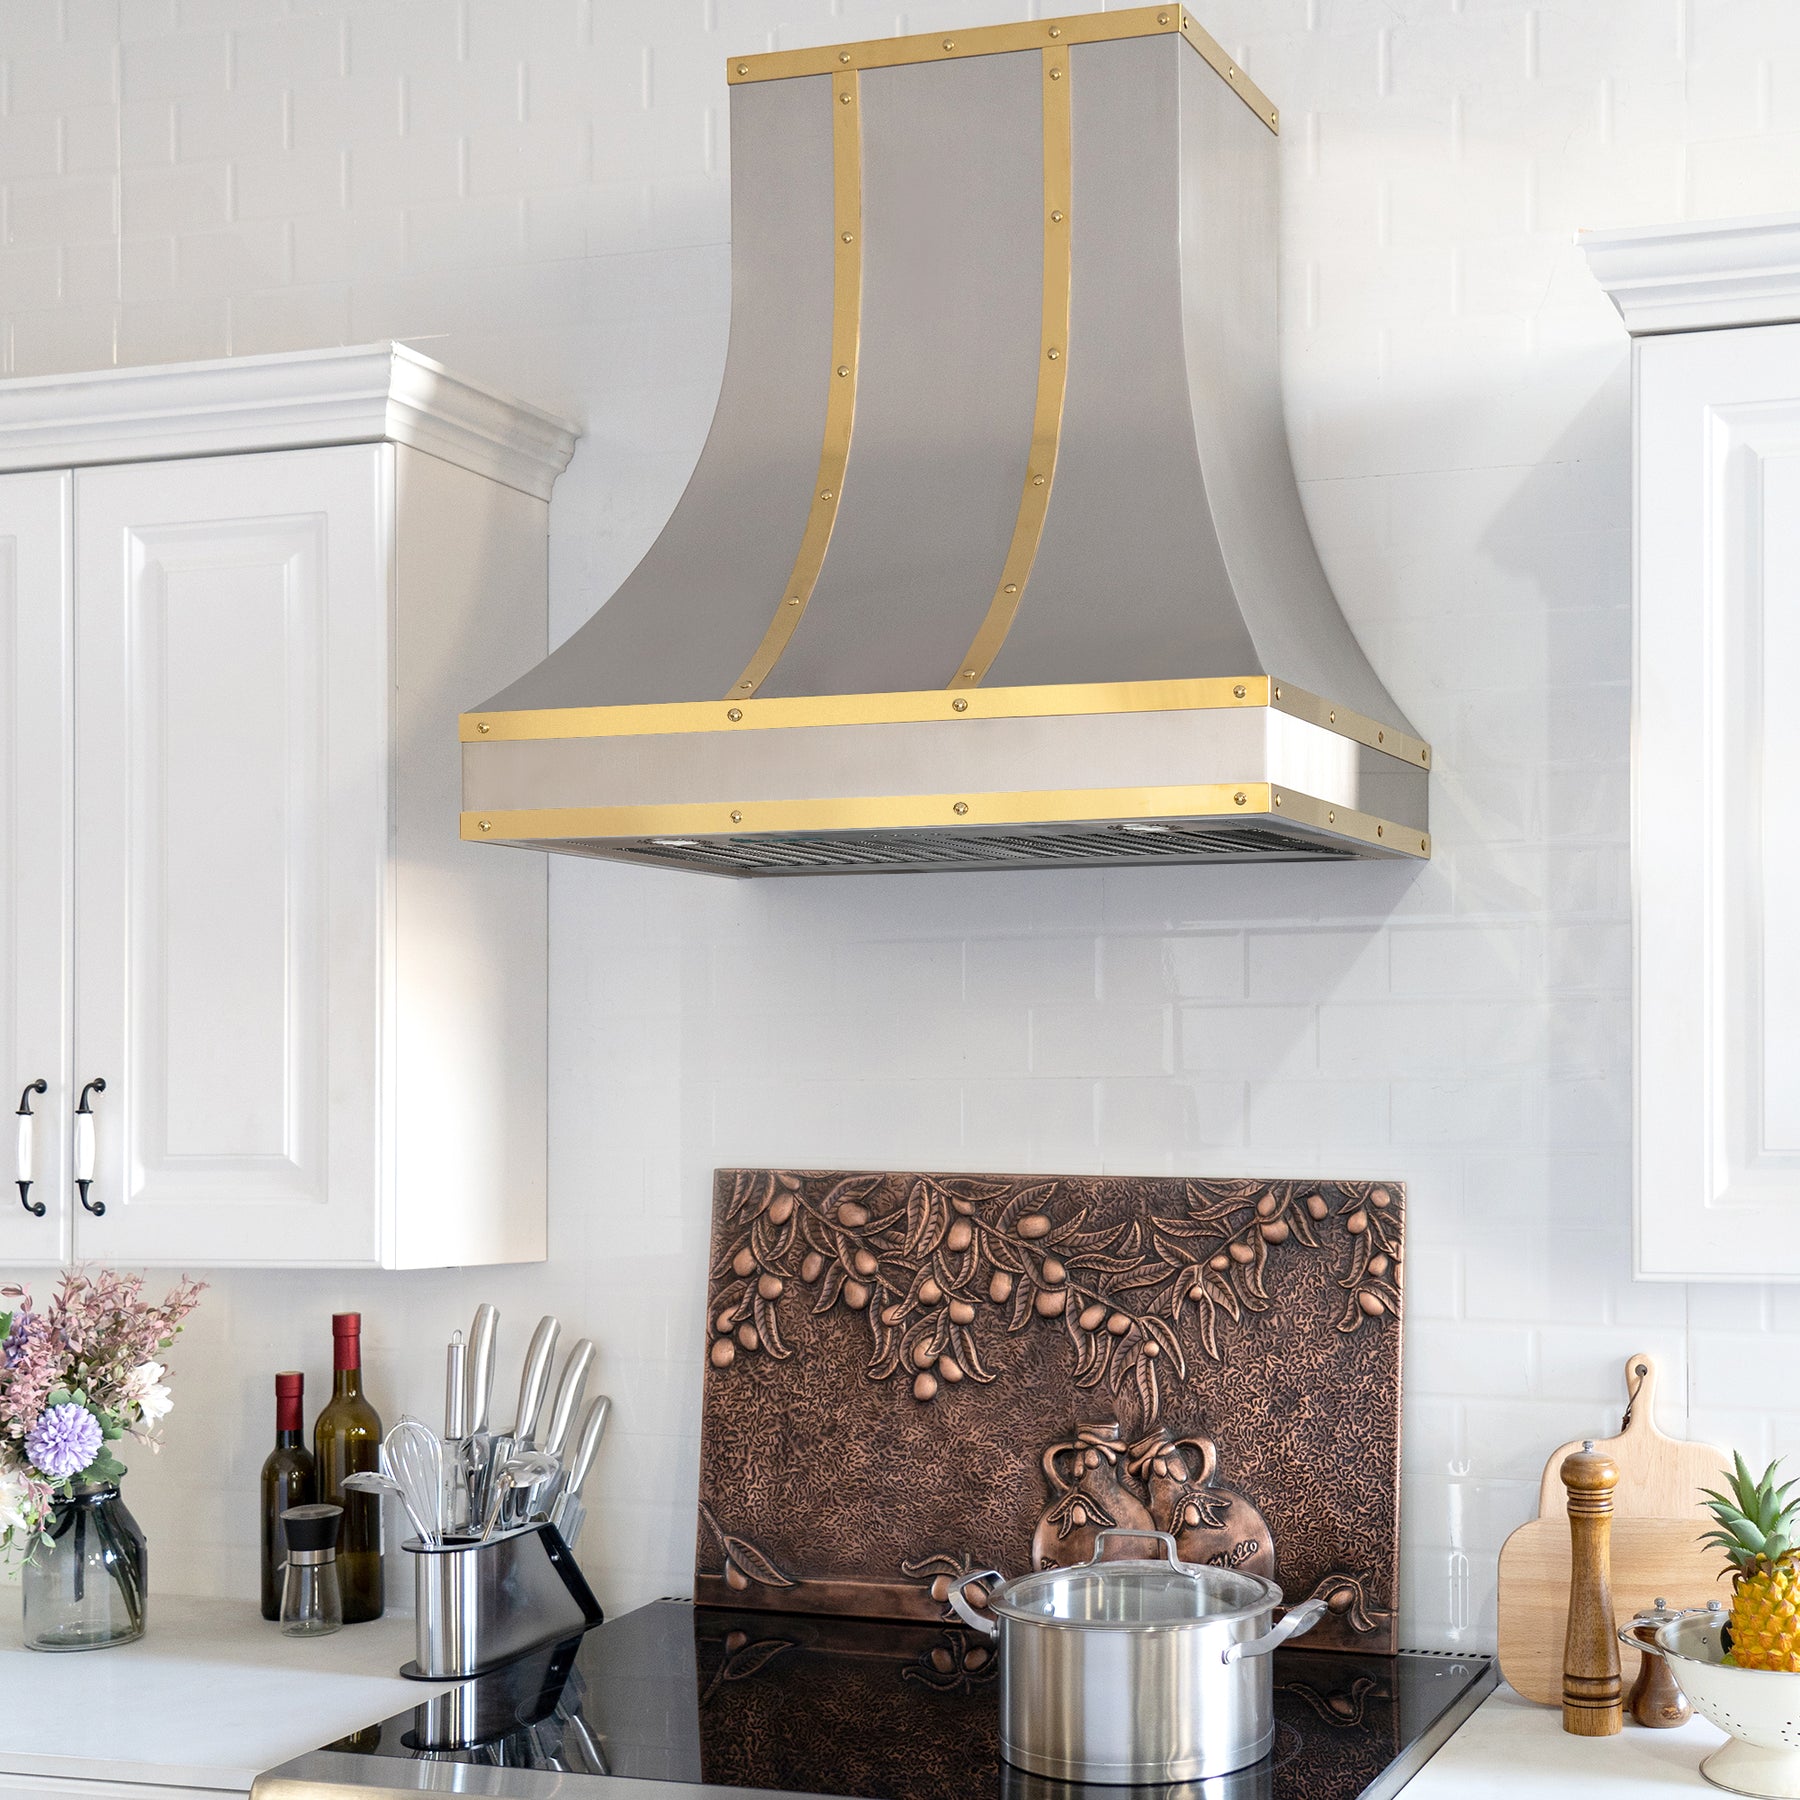 Fobest custom brushed stainless steel range hood with brass straps 